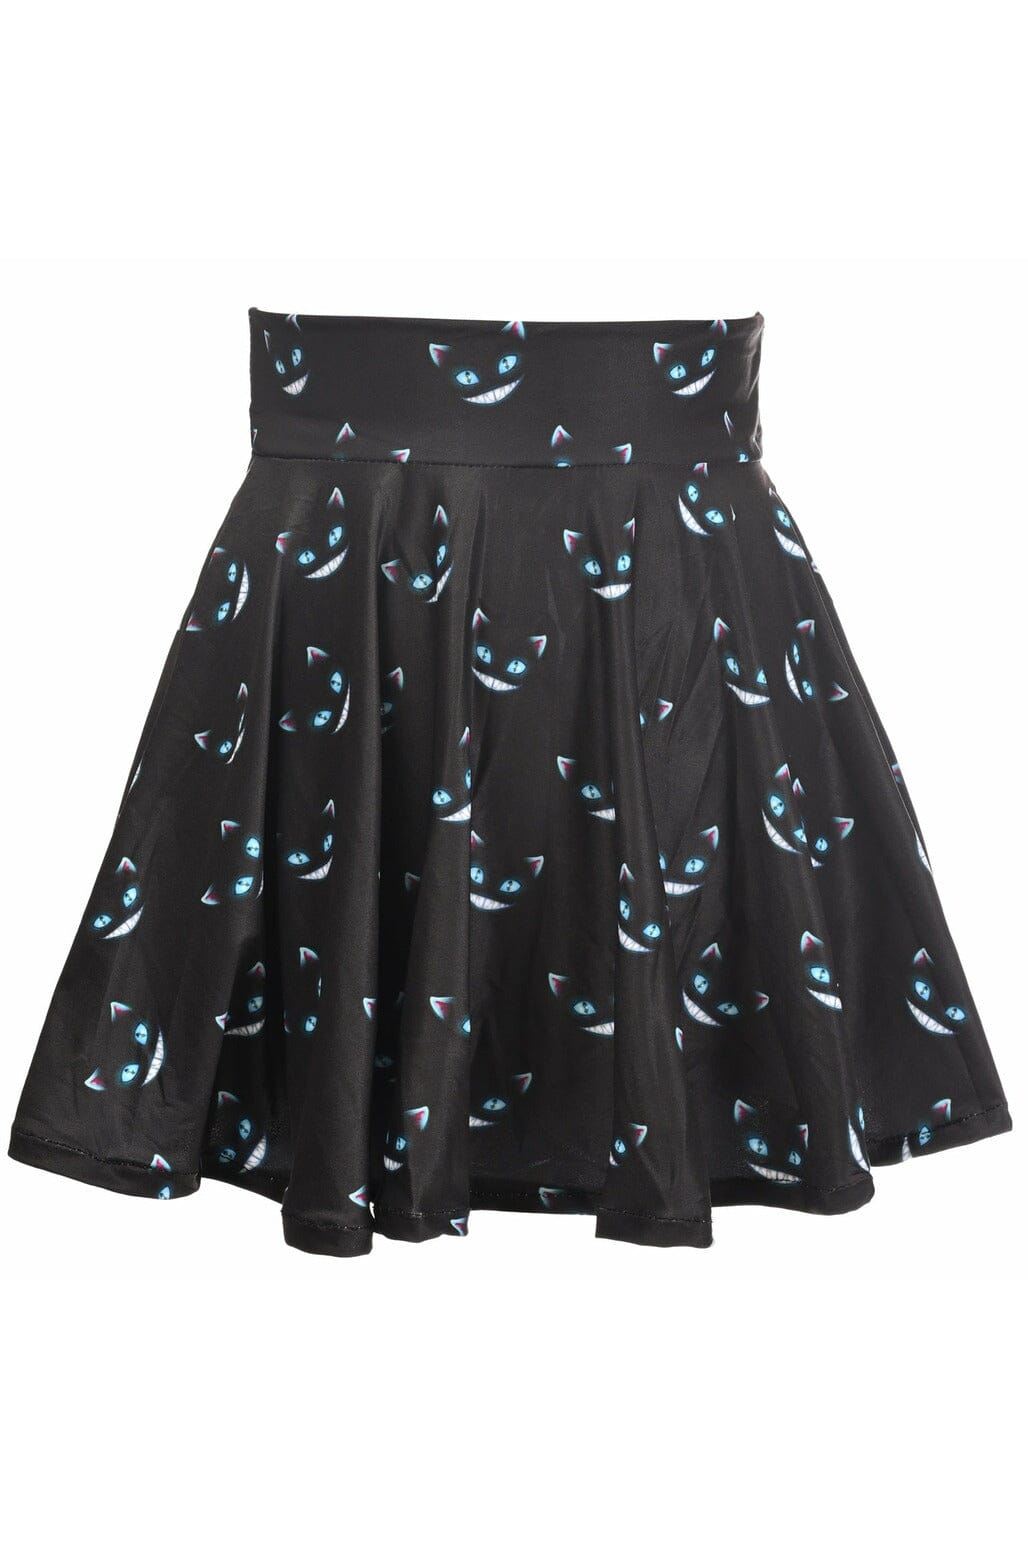 Scary Cats Print Stretch Lycra Skirt-Costume Skirts-Daisy Corsets-Black-XS-SEXYSHOES.COM